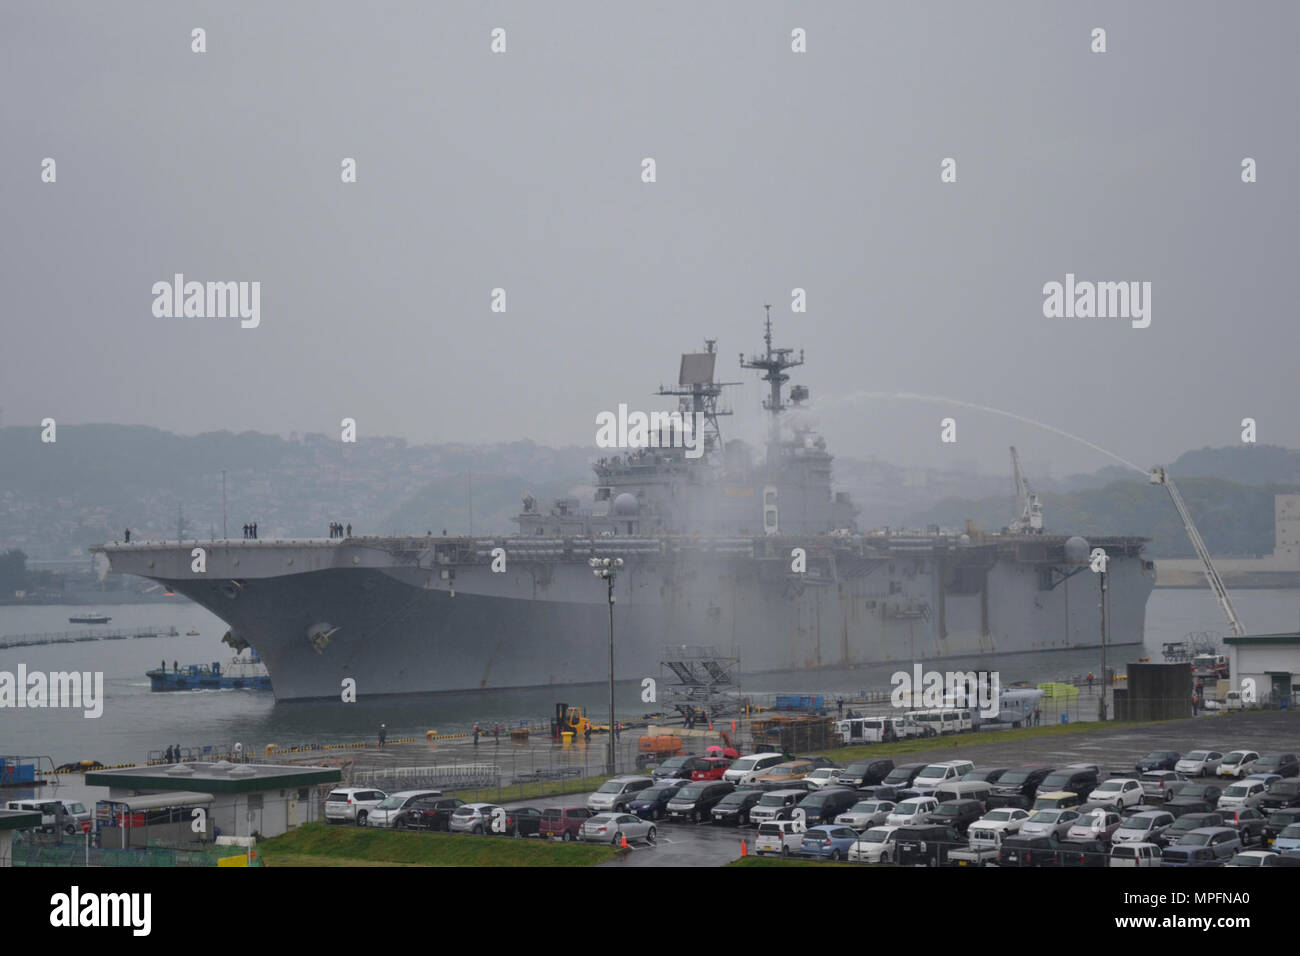 SASEBO, Japan (April 10, 2017) The amphibious assault ship USS Bonhomme Richard (LHD 6) returns to Sasebo, Japan, after a patrol in the Indo-Asia-Pacific region. Bonhomme Richard embarked the 31st Marine Expeditionary Unit (31st MEU) to enhance U.S. Navy and U.S. Marine Corps integration and to work with allies and partners in the region. Stock Photo